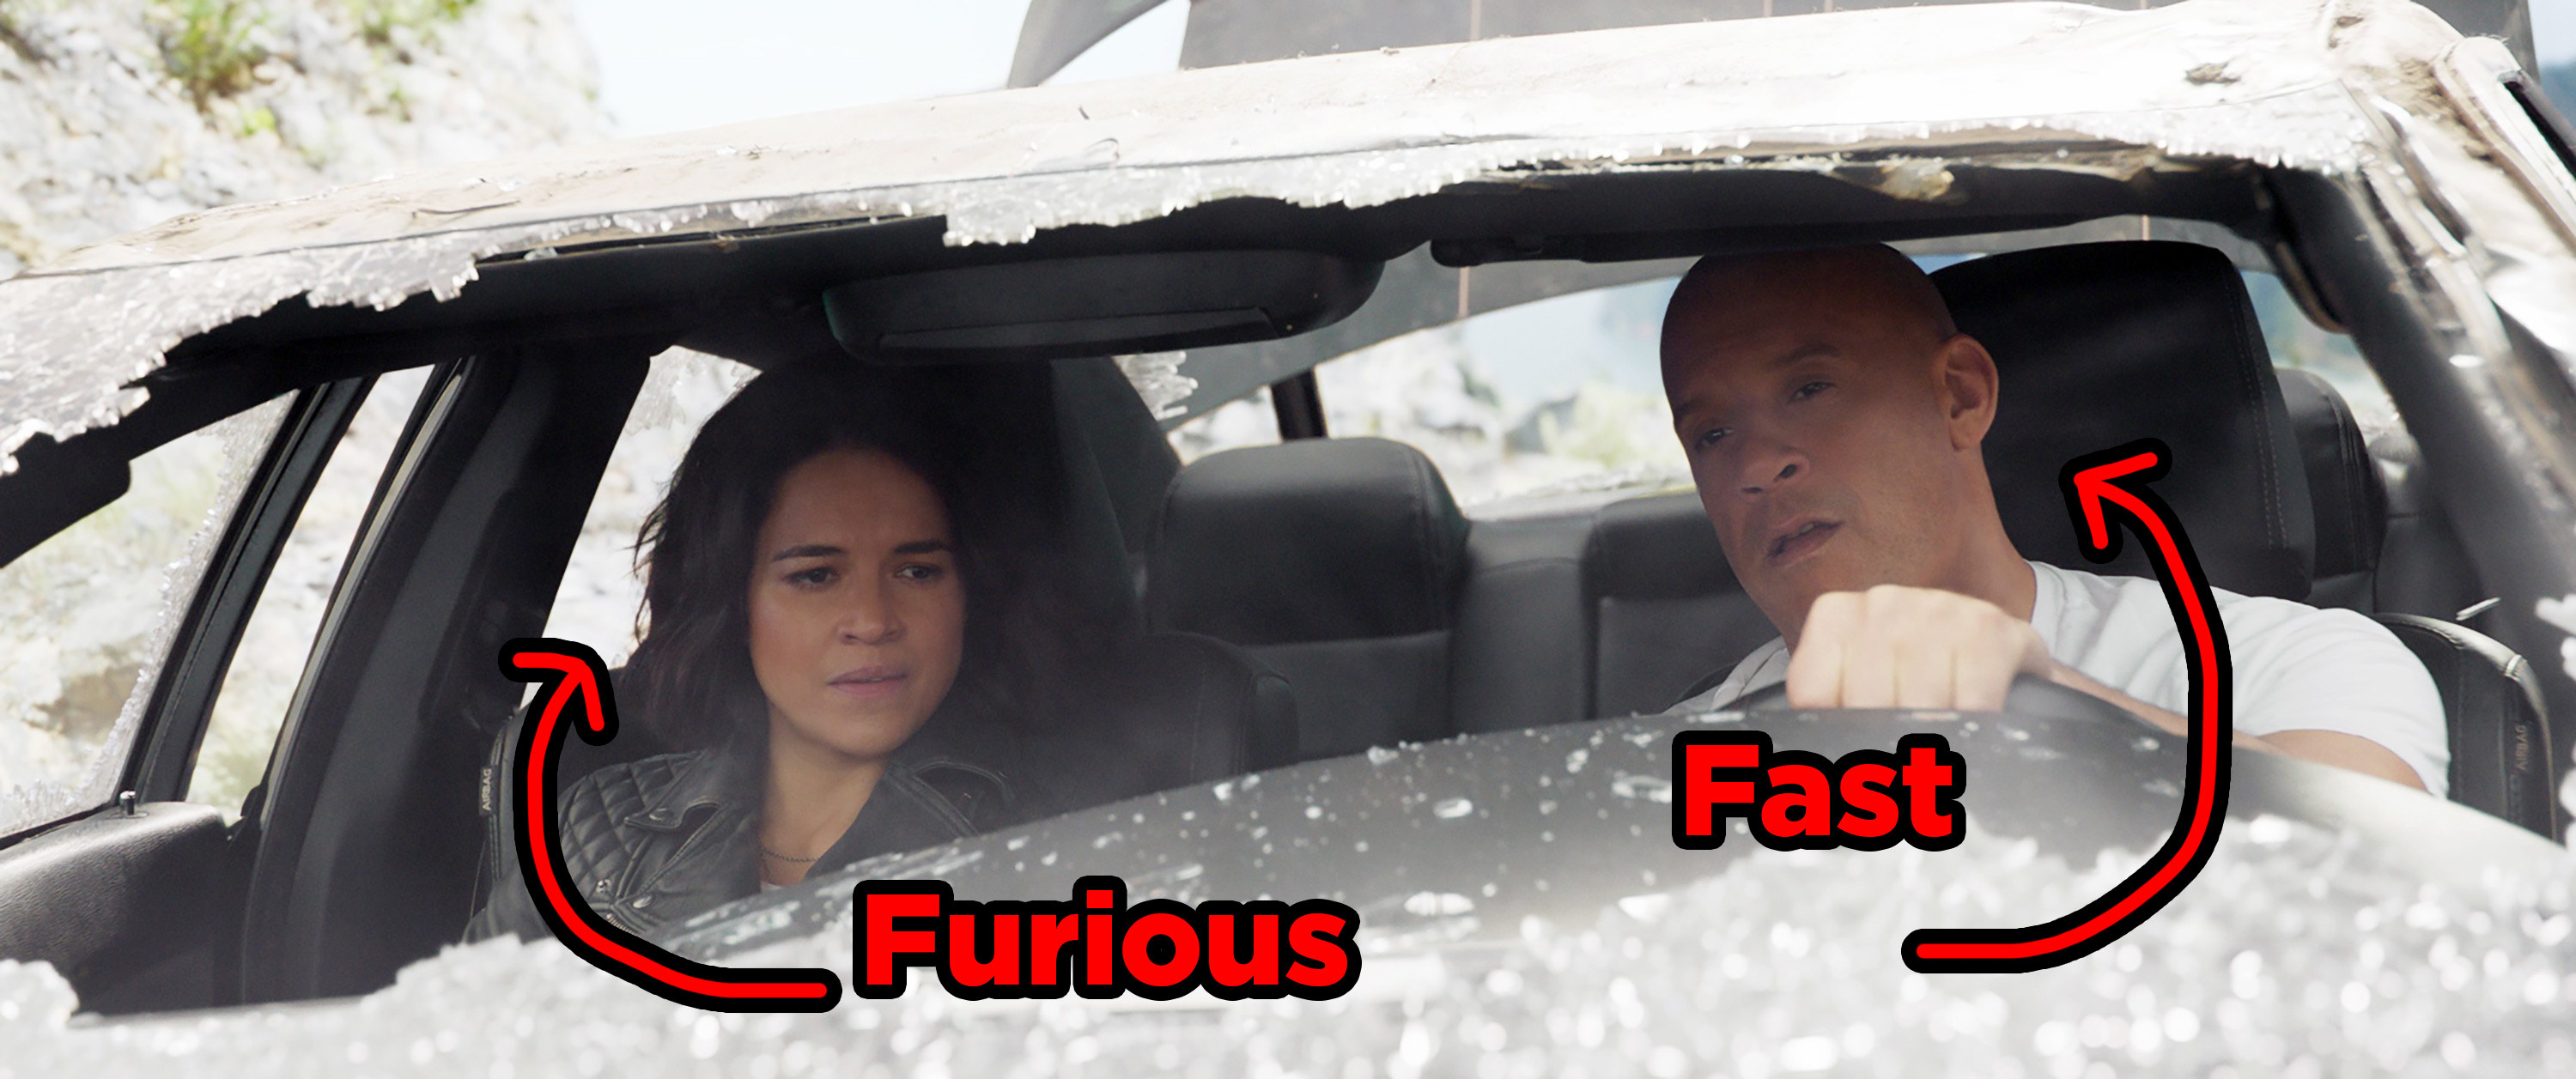 Michelle Rodriguez and Vin Diesel in F9, Michelle is labeled as furious and Vin is labeled as Fast